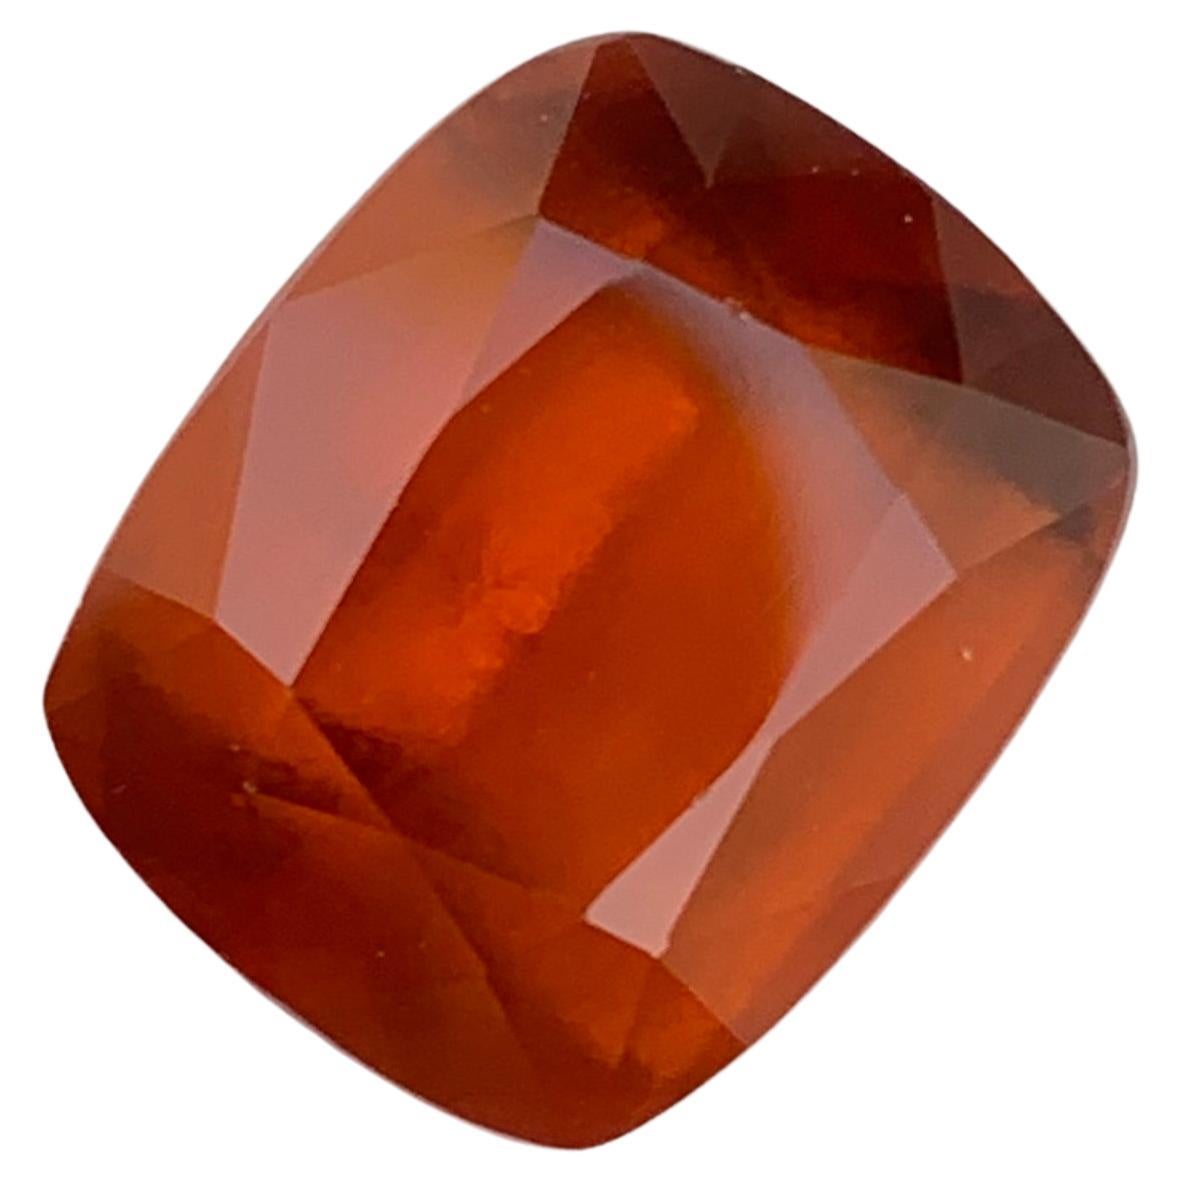 9.65 Carat Natural Loose Smoky Hessonite Garnet Ring Gemstone From Africa For Sale